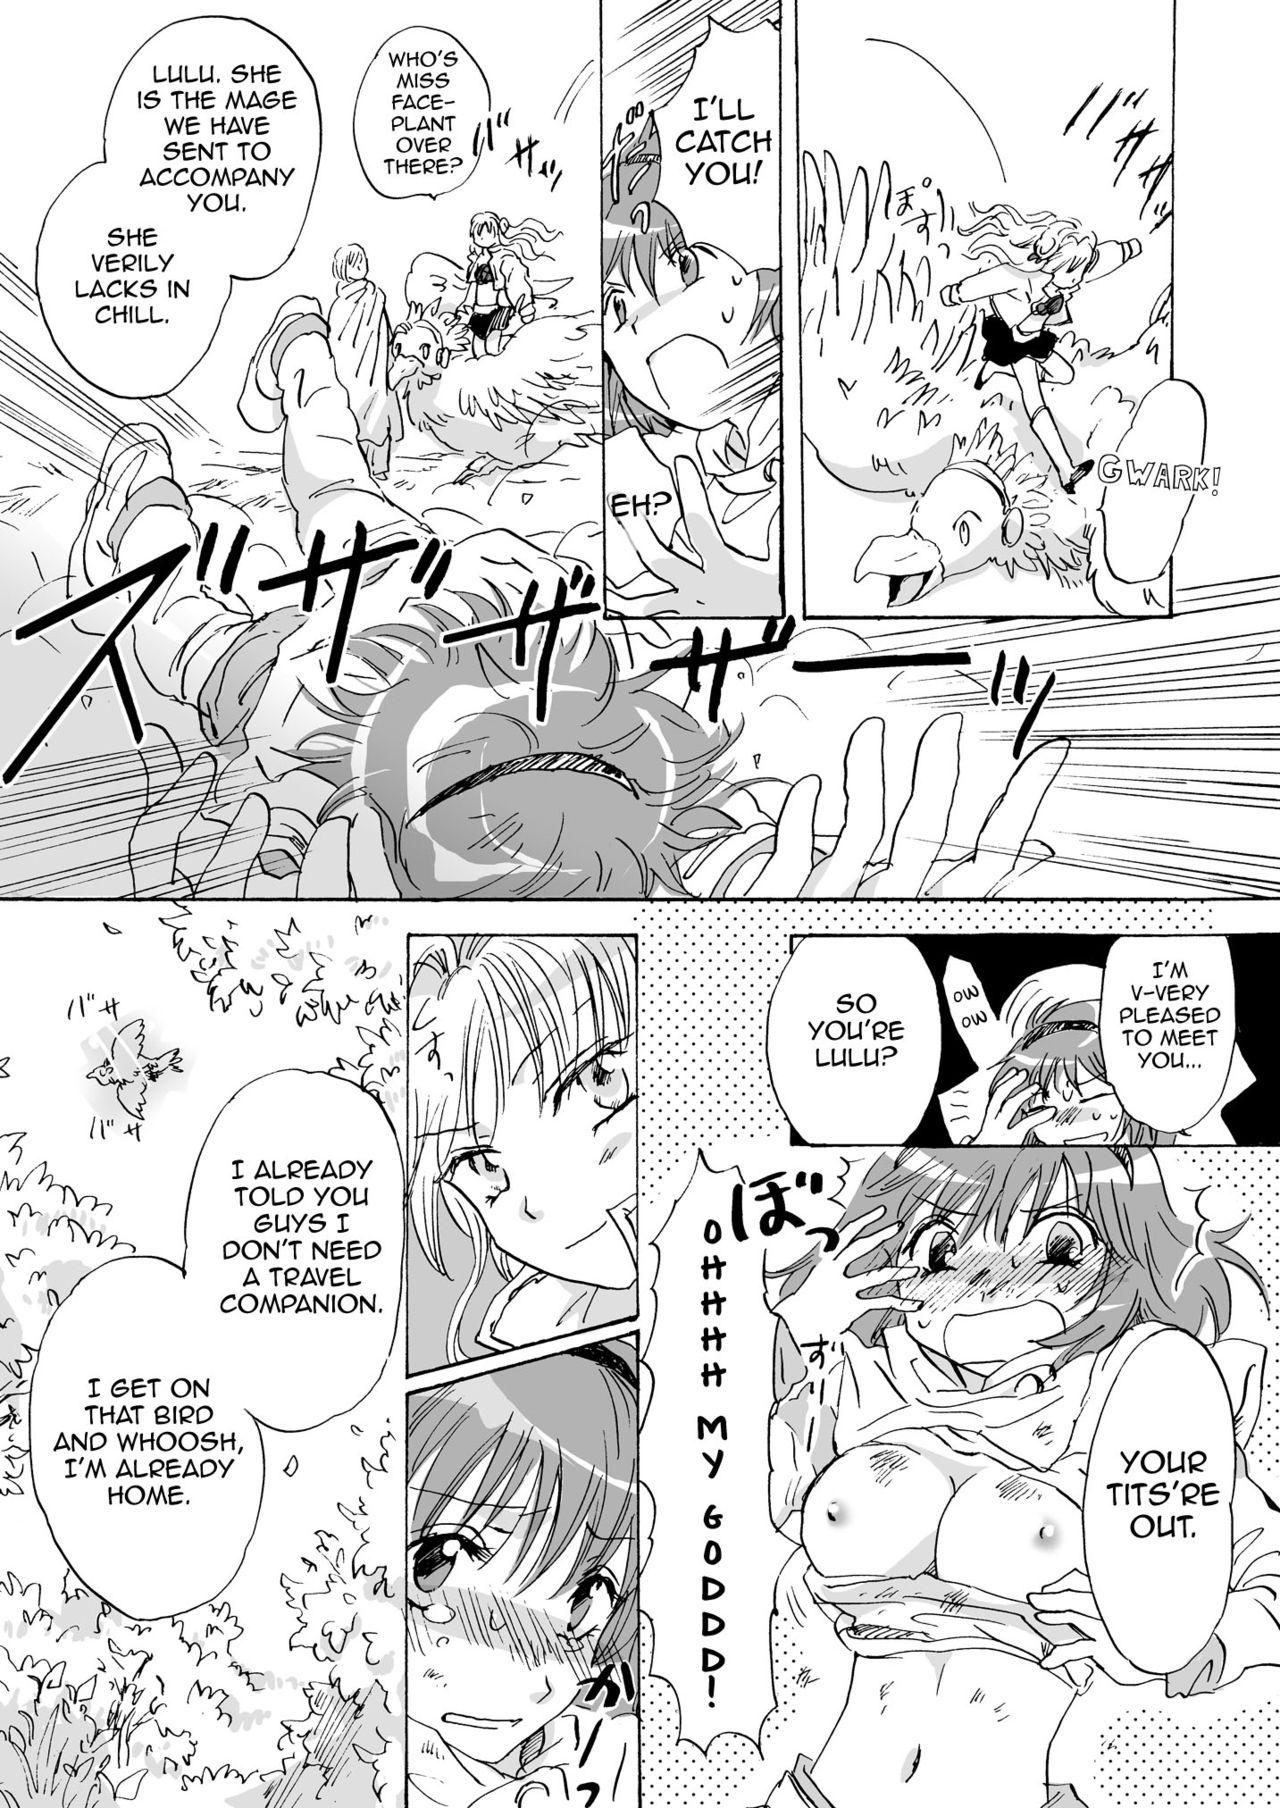 Whooty Cutie Beast Complete Edition Ch. 1-4 Lez - Page 9